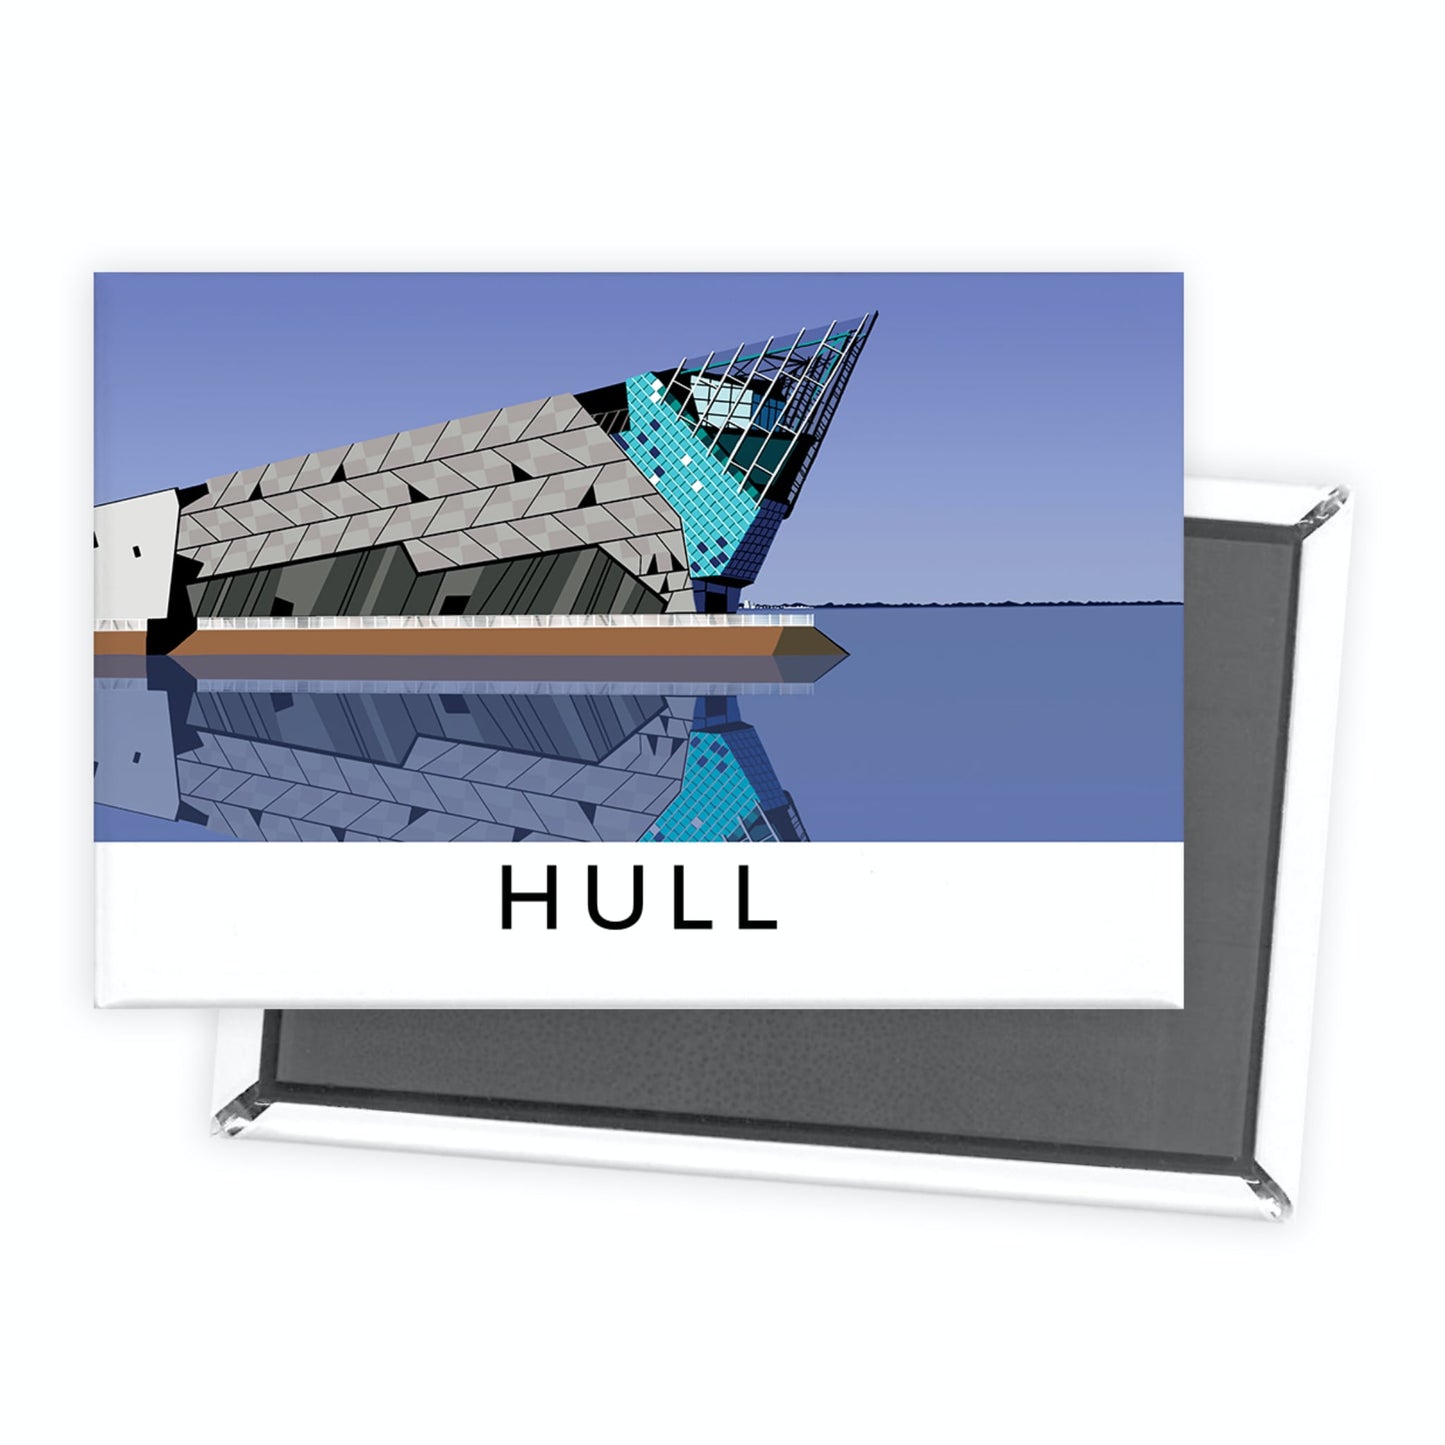 Hull - The Great Yorkshire